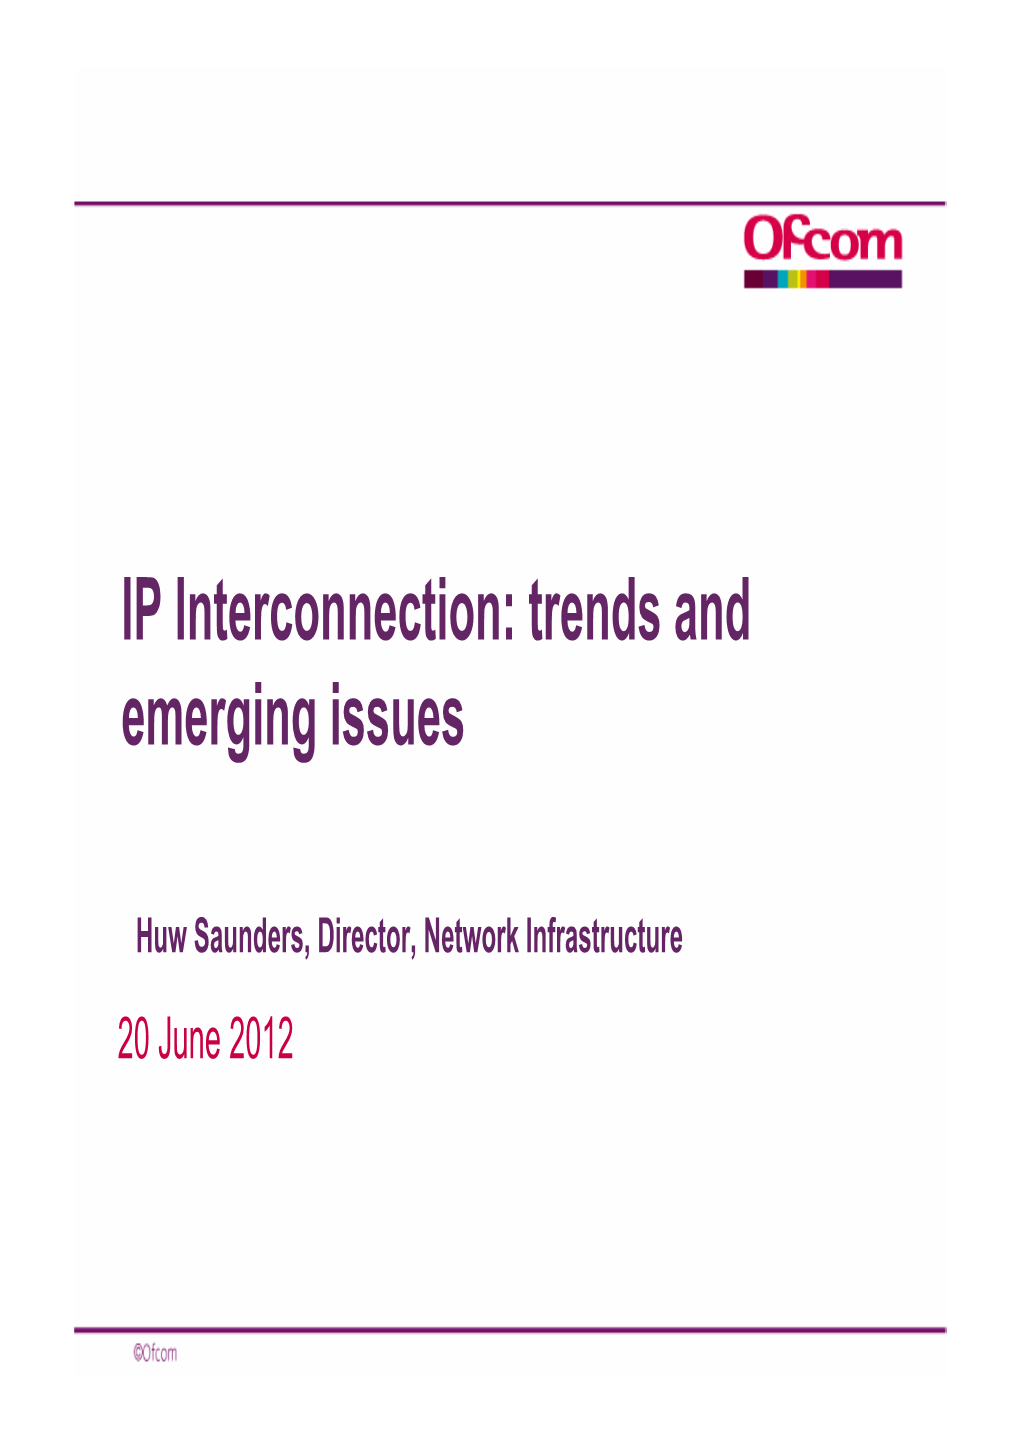 IP Interconnection: Trends and Emerging Issues